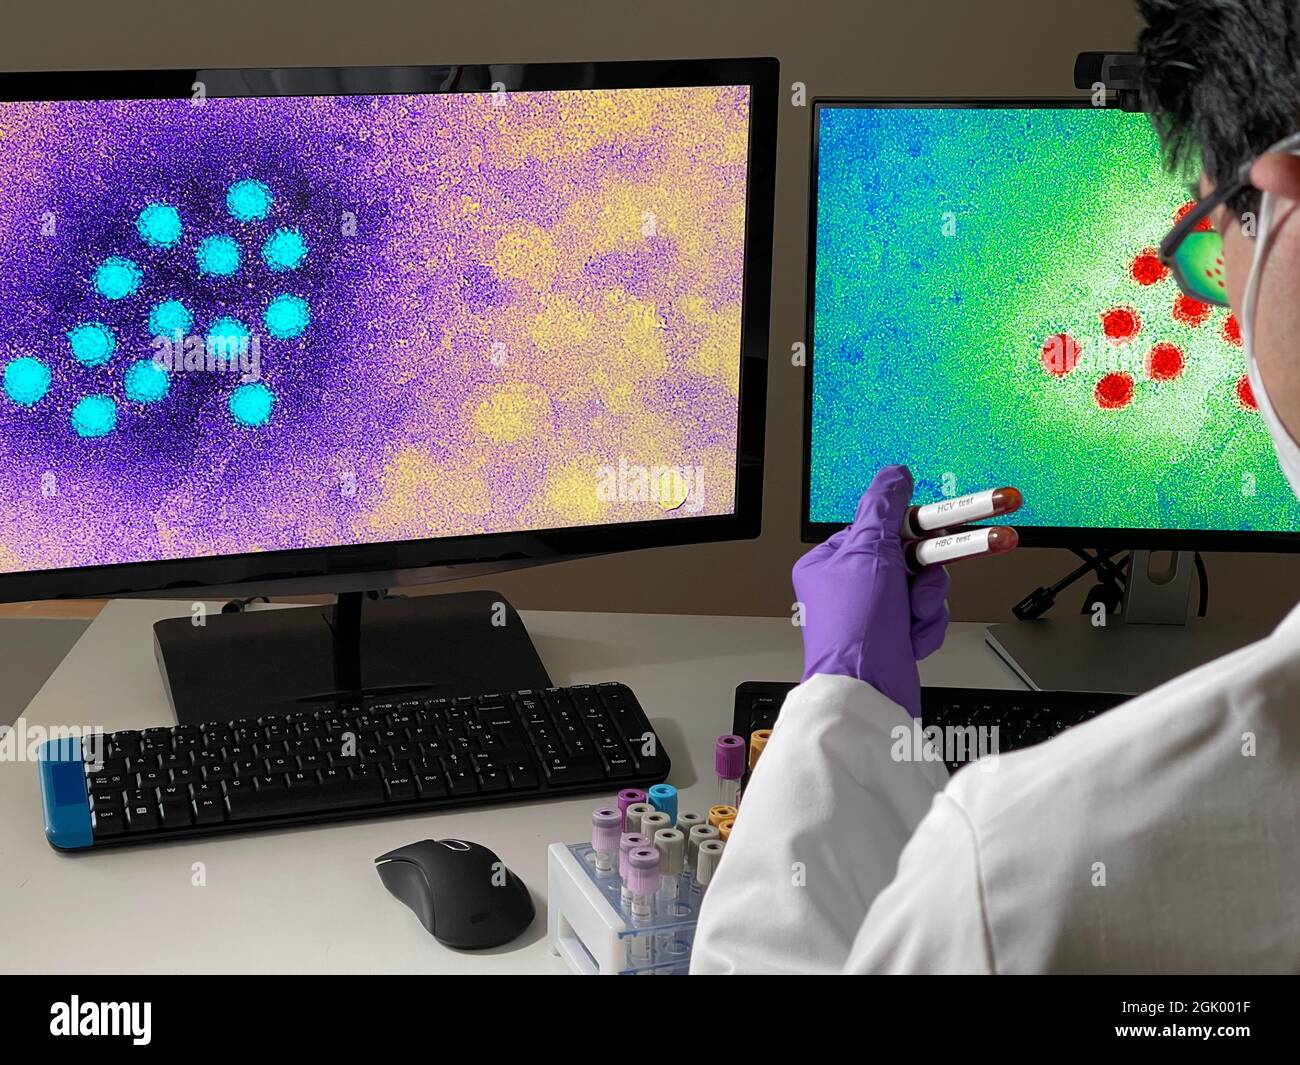 Laboratory technician doing research with images of hepatitis A virus on computer. Stock Photo